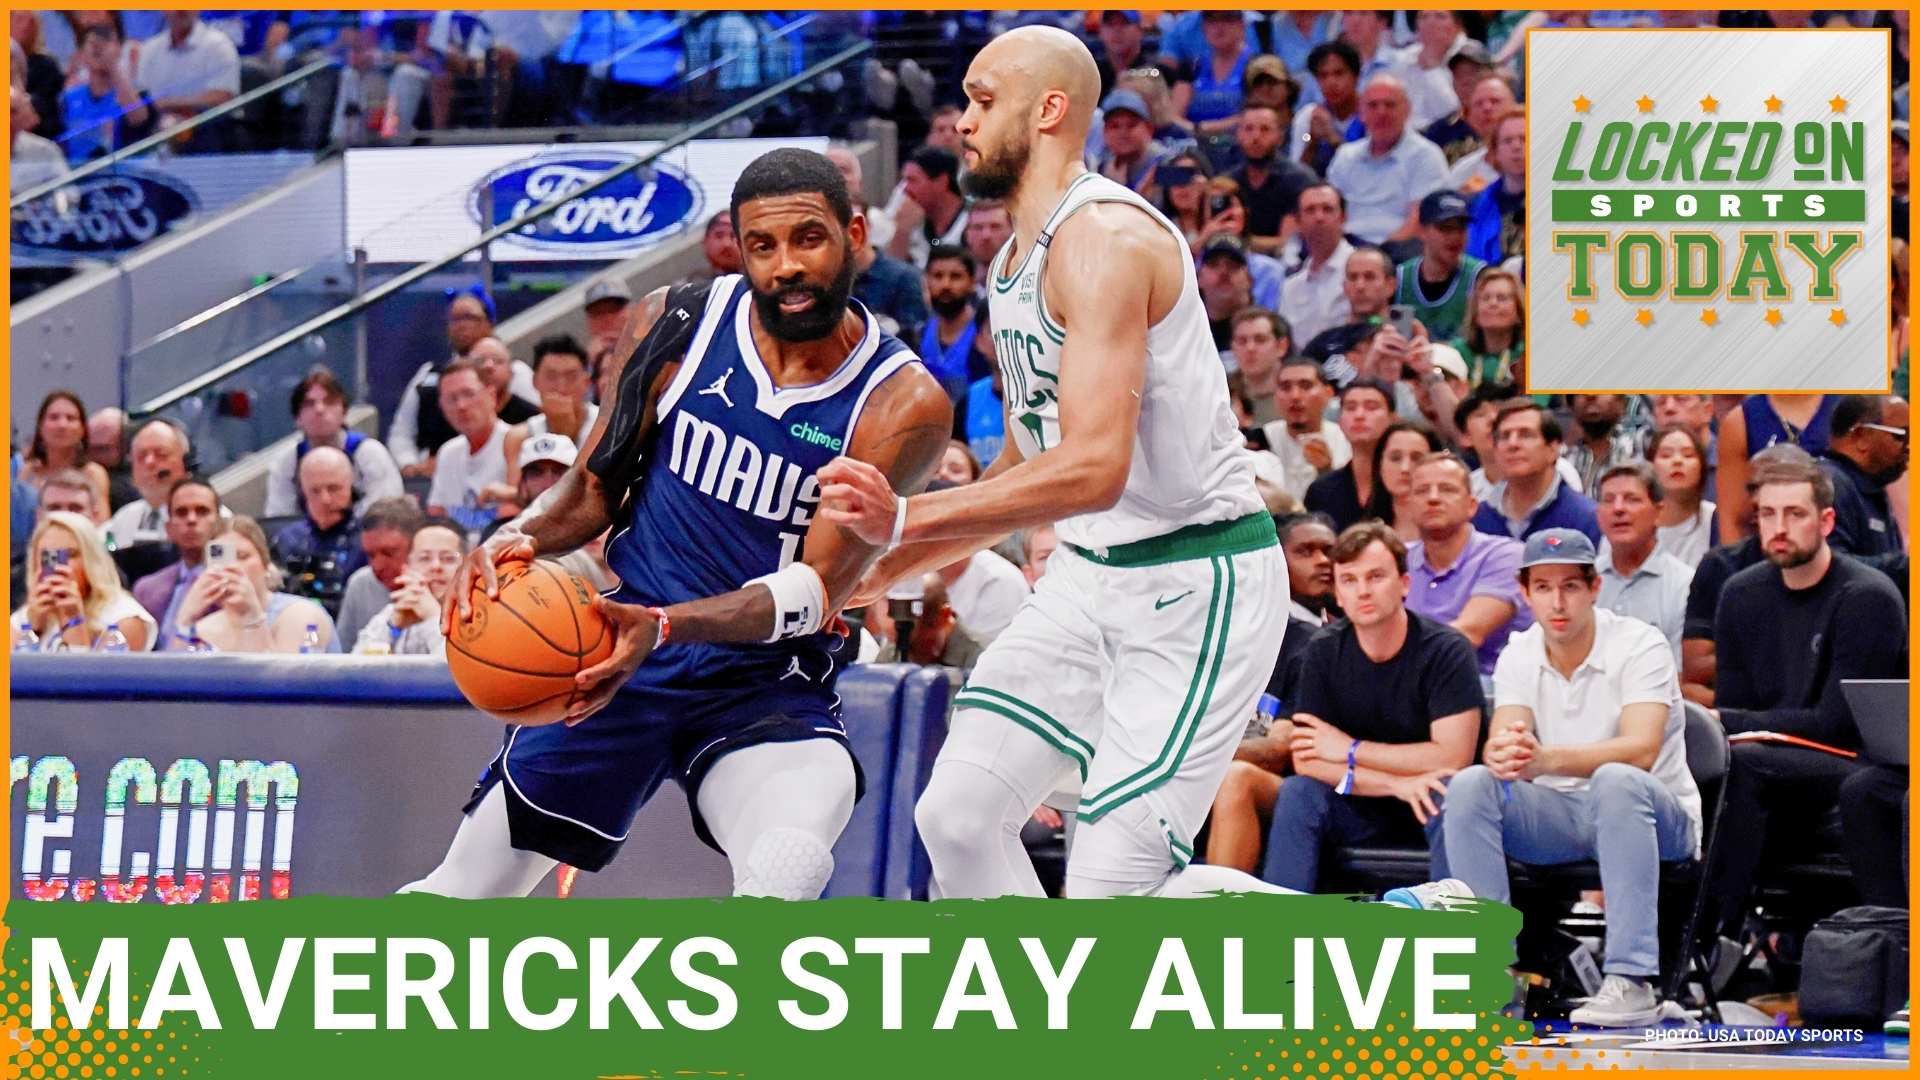 The Mavs finally broke through. Will they make this a series with the Celtics? Also, Rory McIlroy’s Major Tournament drought rages on.